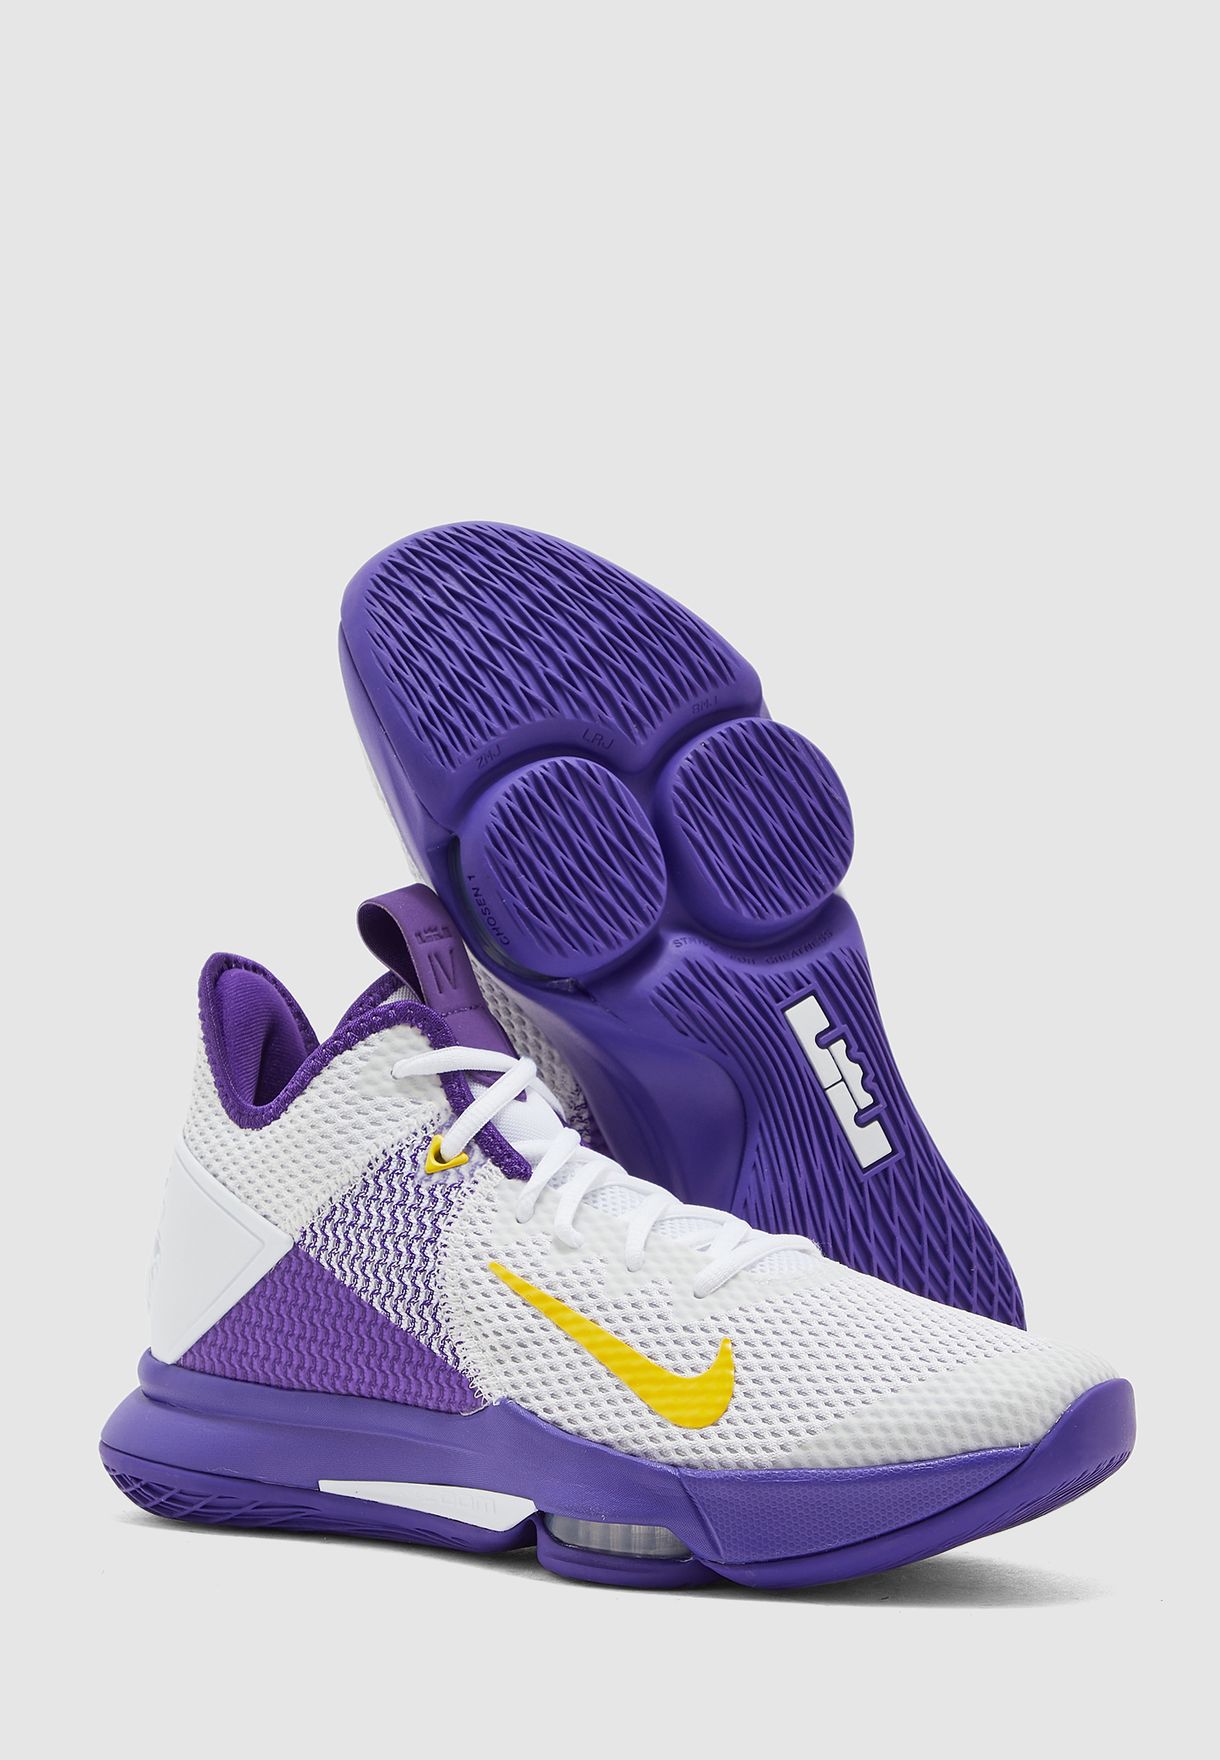 purple and white lebrons